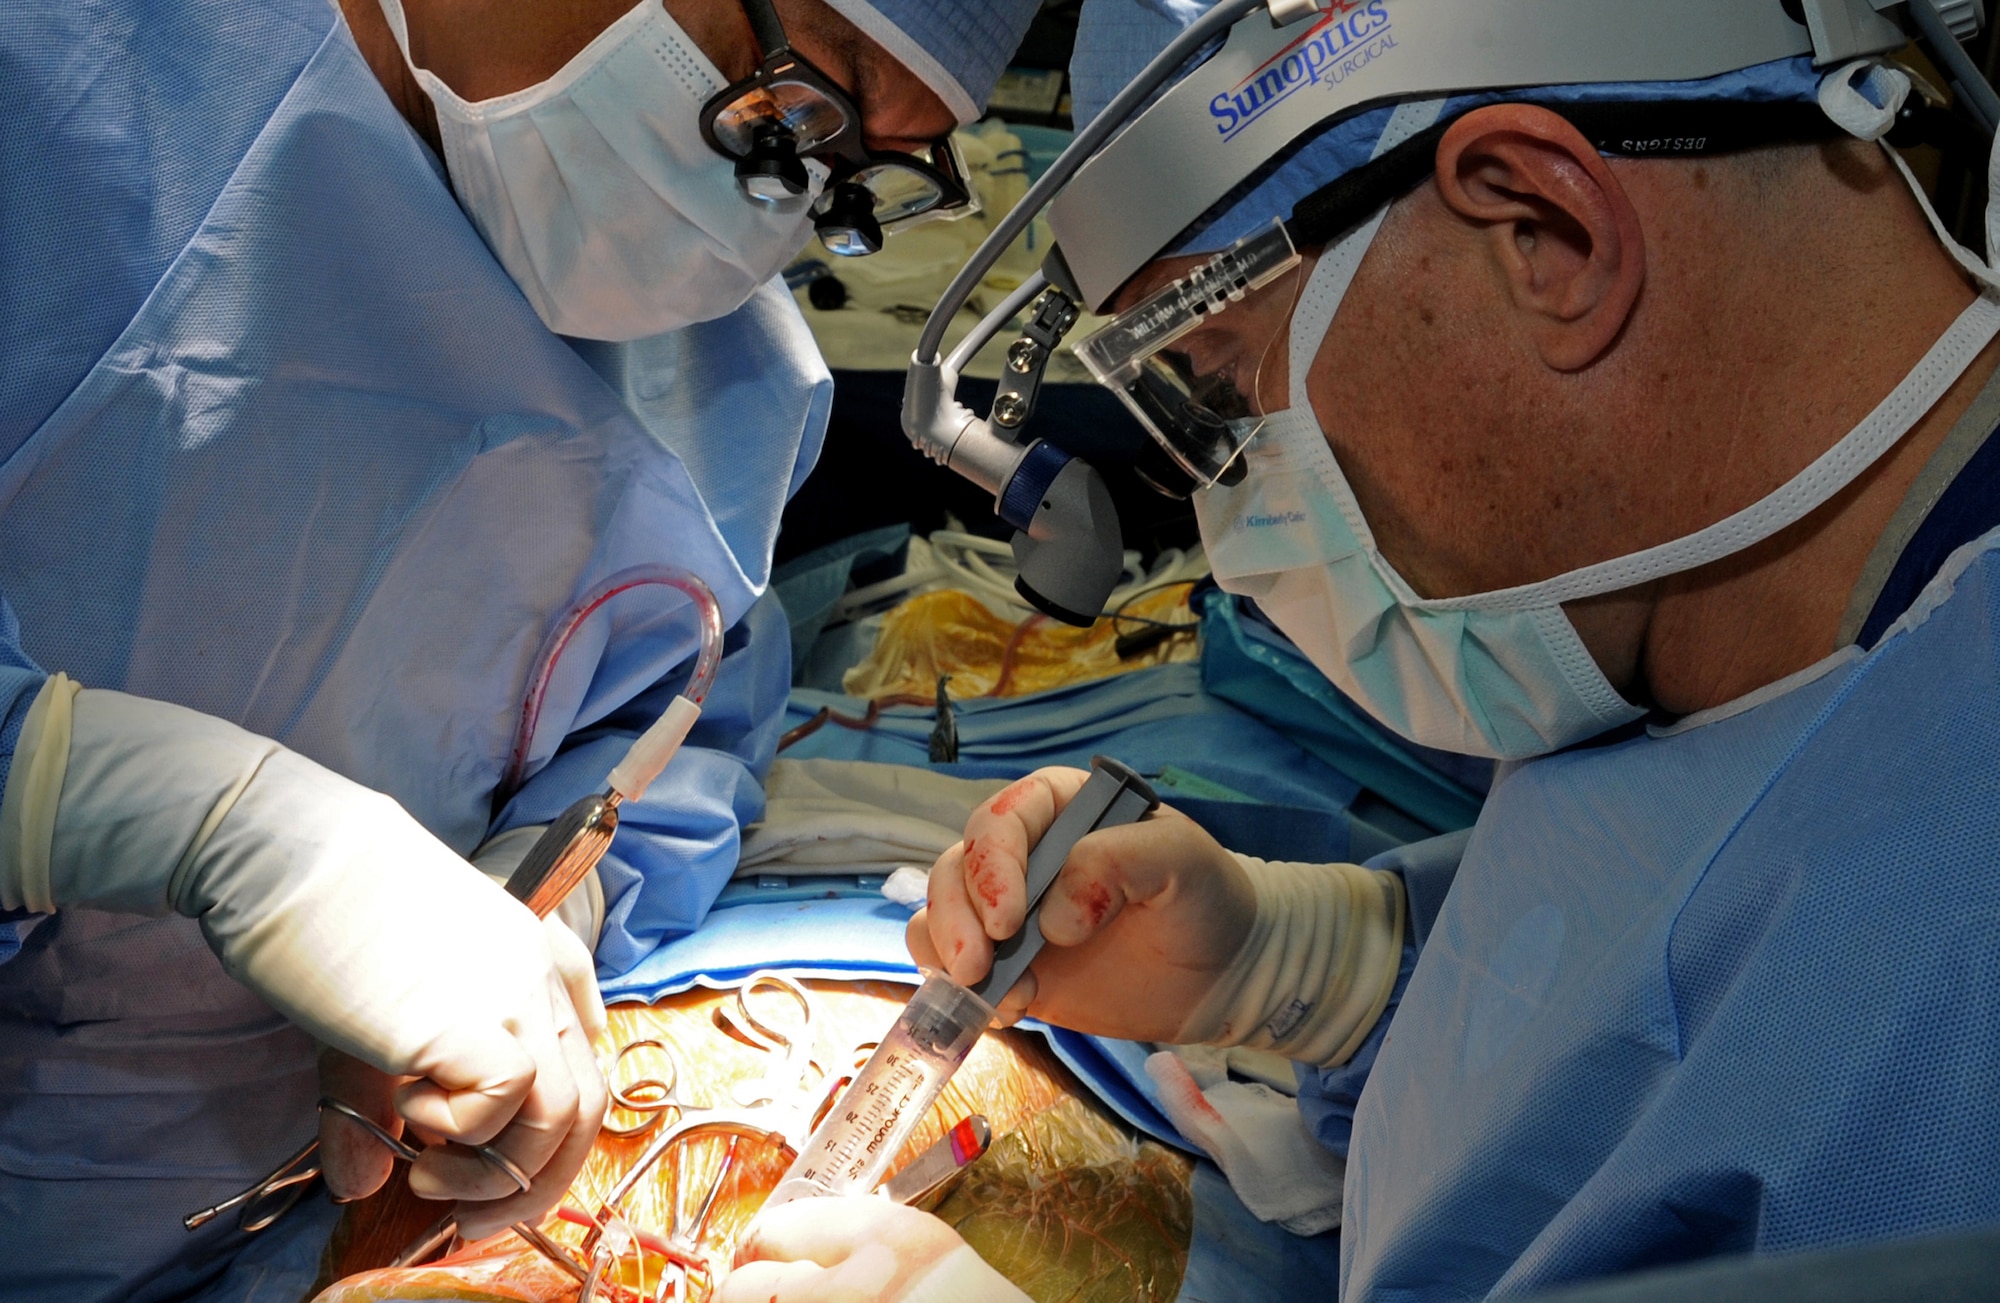 Physician assistant William Gadea assists Col. (Dr.) Darrin Clouse, 60th Surgical Operations Squadron vascular surgeon, during a carotid endarterectomy surgery May 23 at David Grant USAF Medical Center. (U.S. Air Force photo/ Staff Sgt. Liliana Moreno)